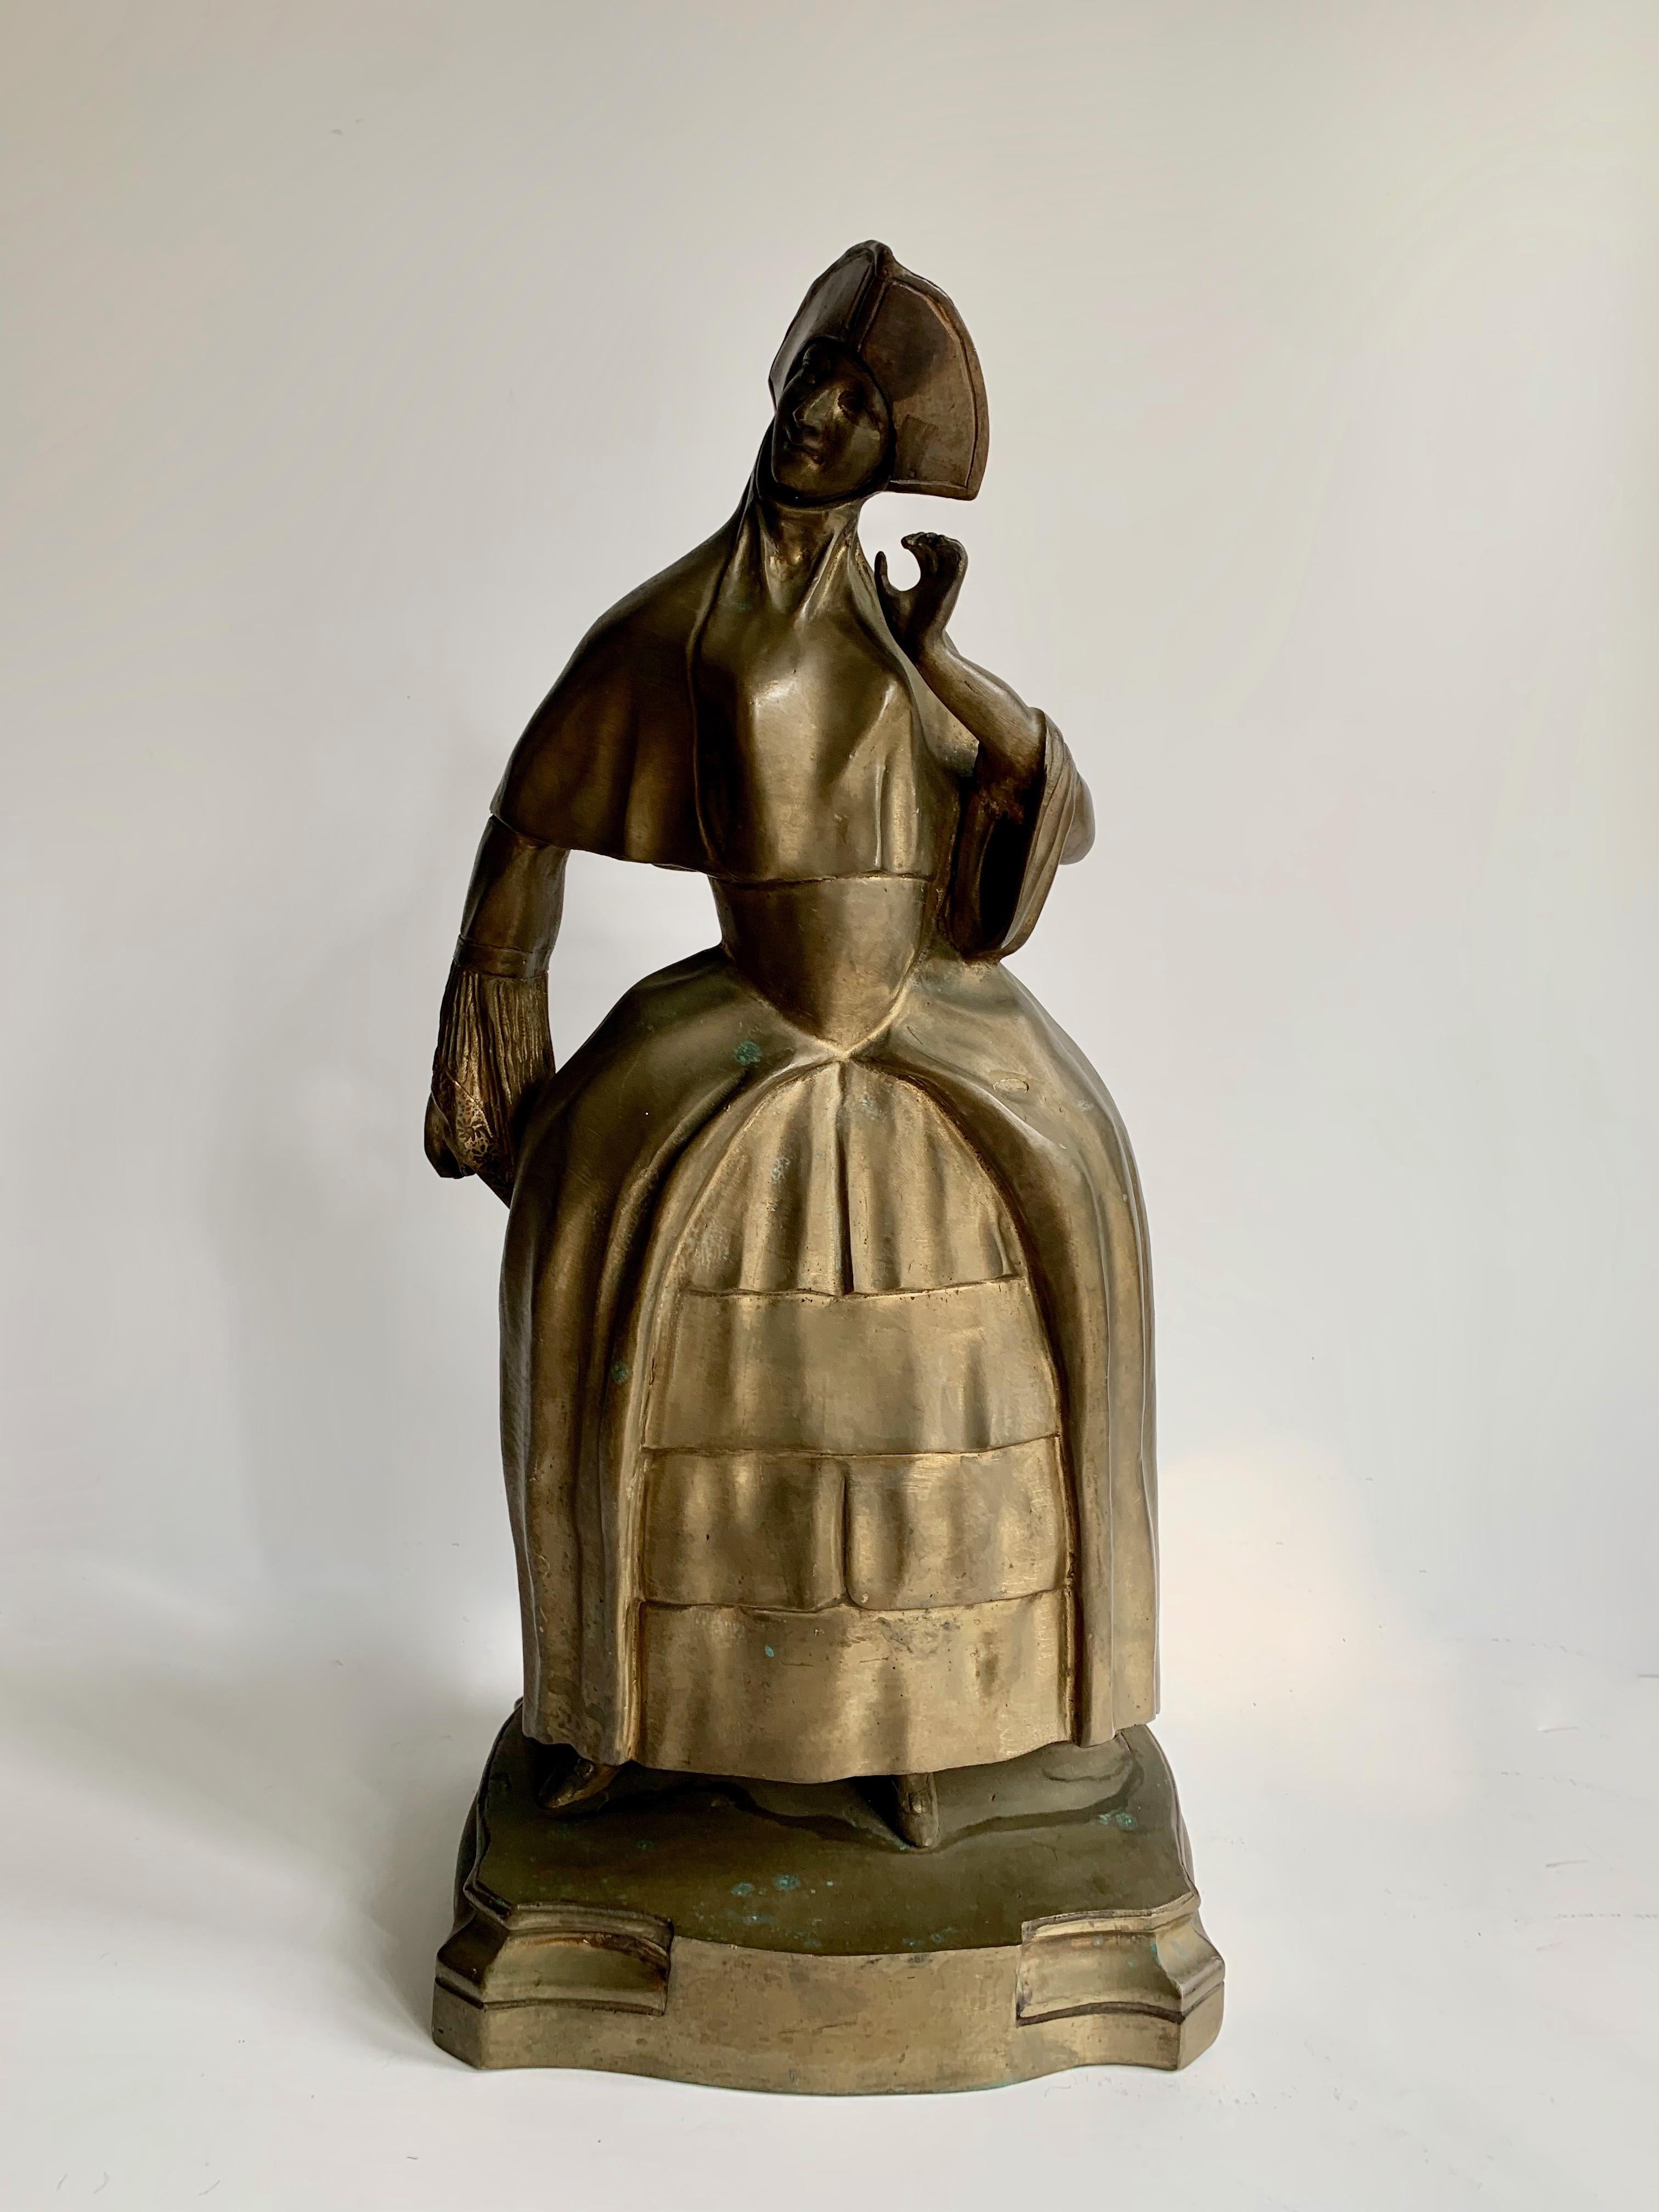 A wonderful sculptural figure of a lady, intricate in detail and wearing women's medieval attire and hat. 

A good weight at 18 lbs - use as a heavy duty bookend, decor or door stop. Be creative! 

 